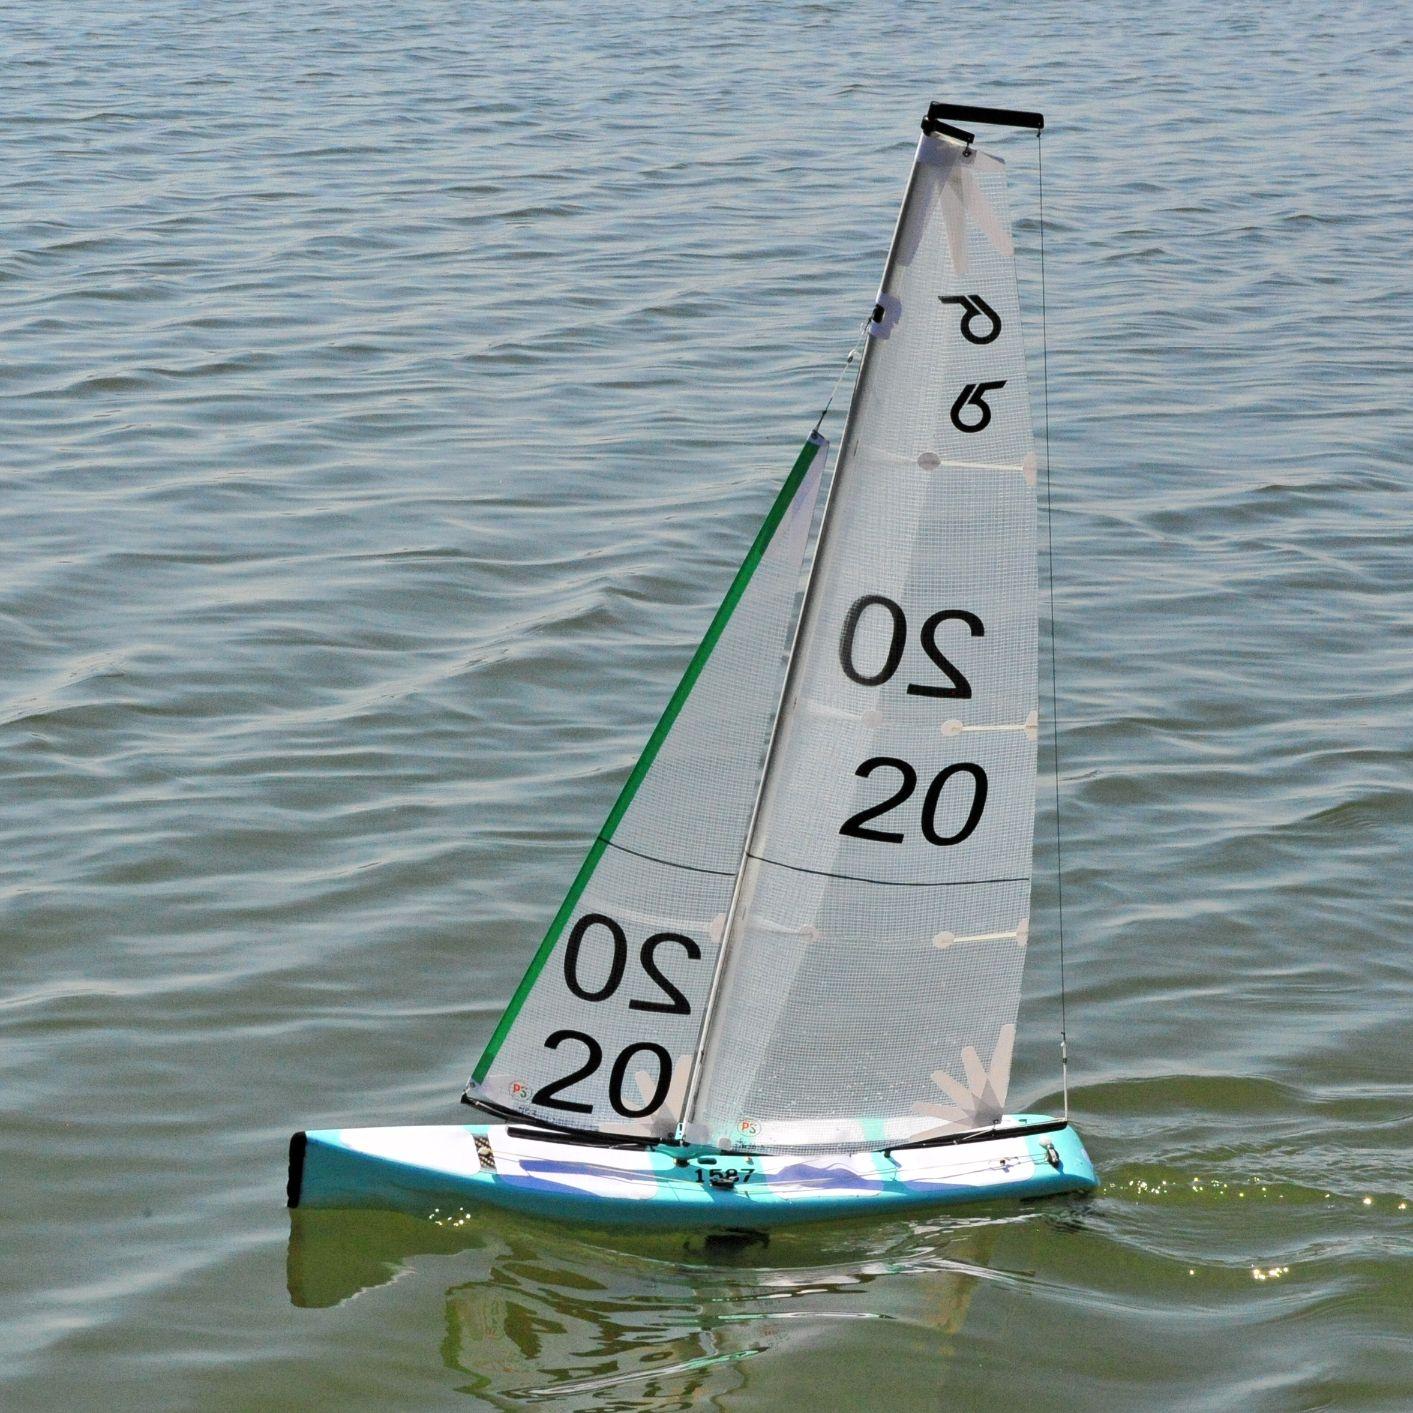 Rg65 Rc Sailboat For Sale: 'Factors to Consider When Buying an RG65 RC Sailboat